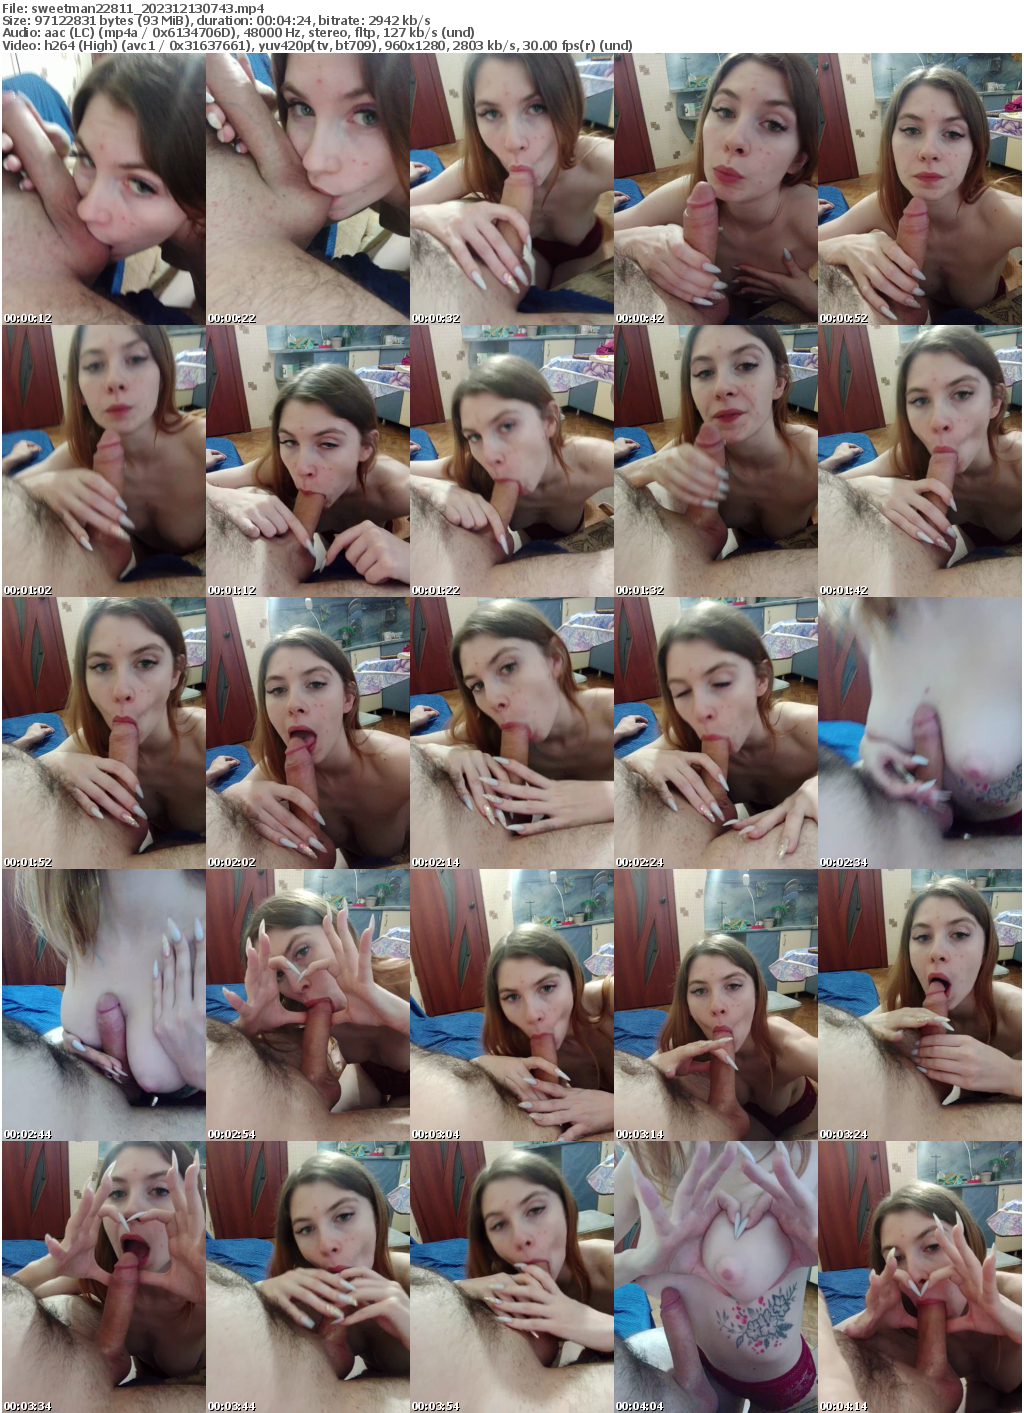 Preview thumb from sweetman22811 on 2023-12-13 @ bongacams